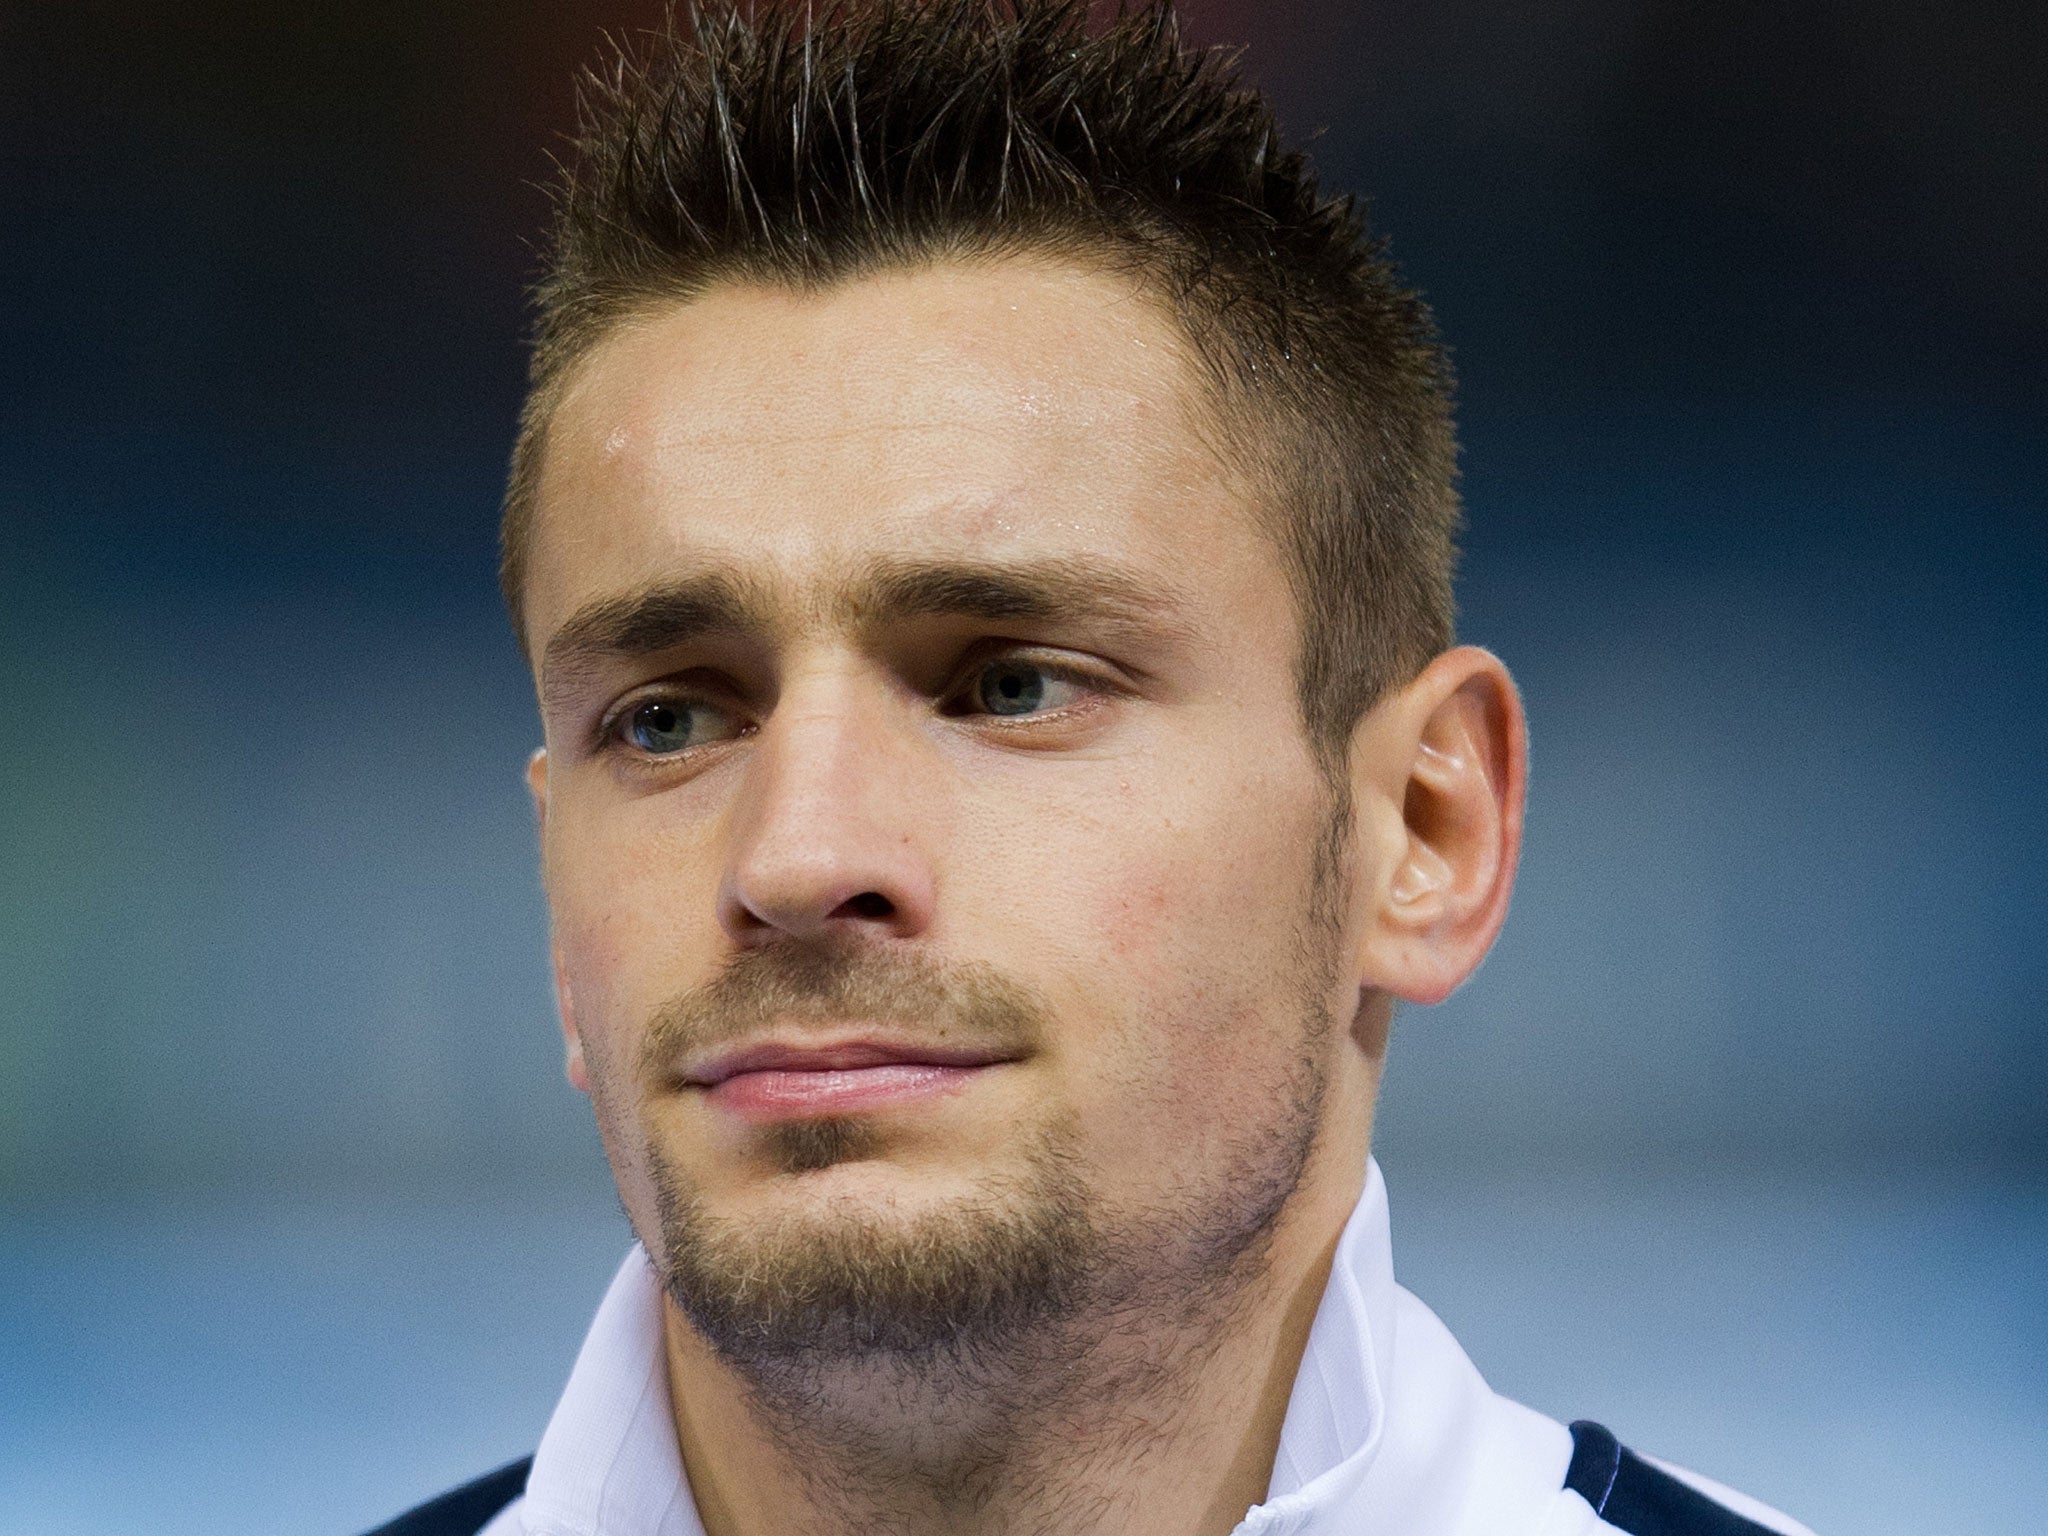 Alan Pardew had to persuade the Newcastle United board in order to land Mathieu Debuchy